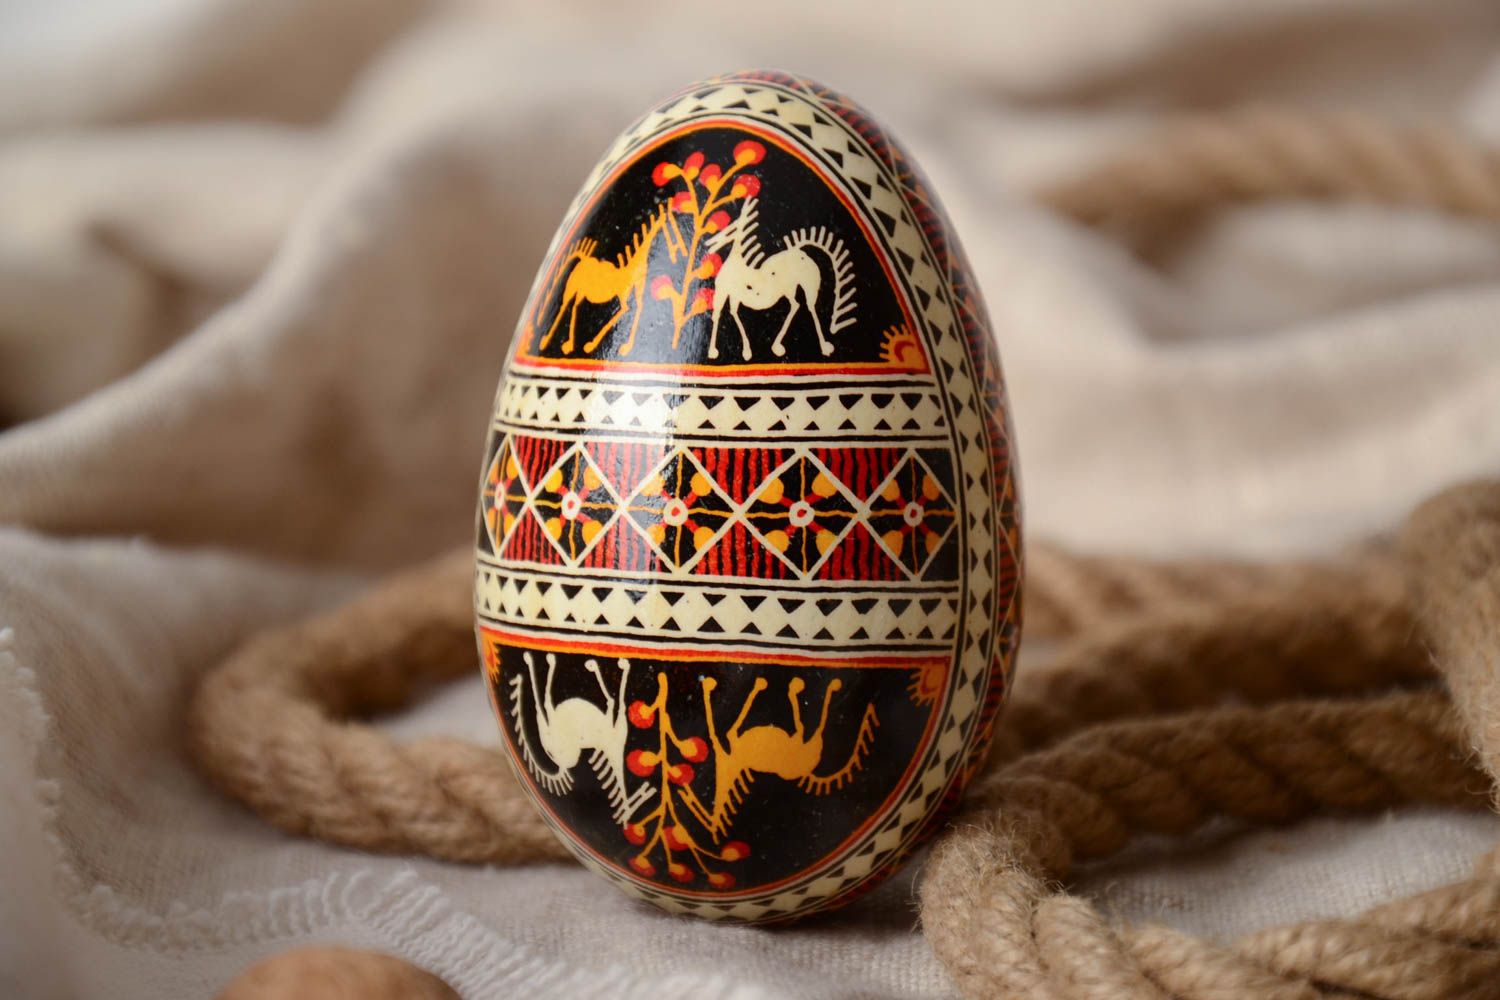 Handmade decorative art painted Easter egg traditional pysanka with horses image photo 1